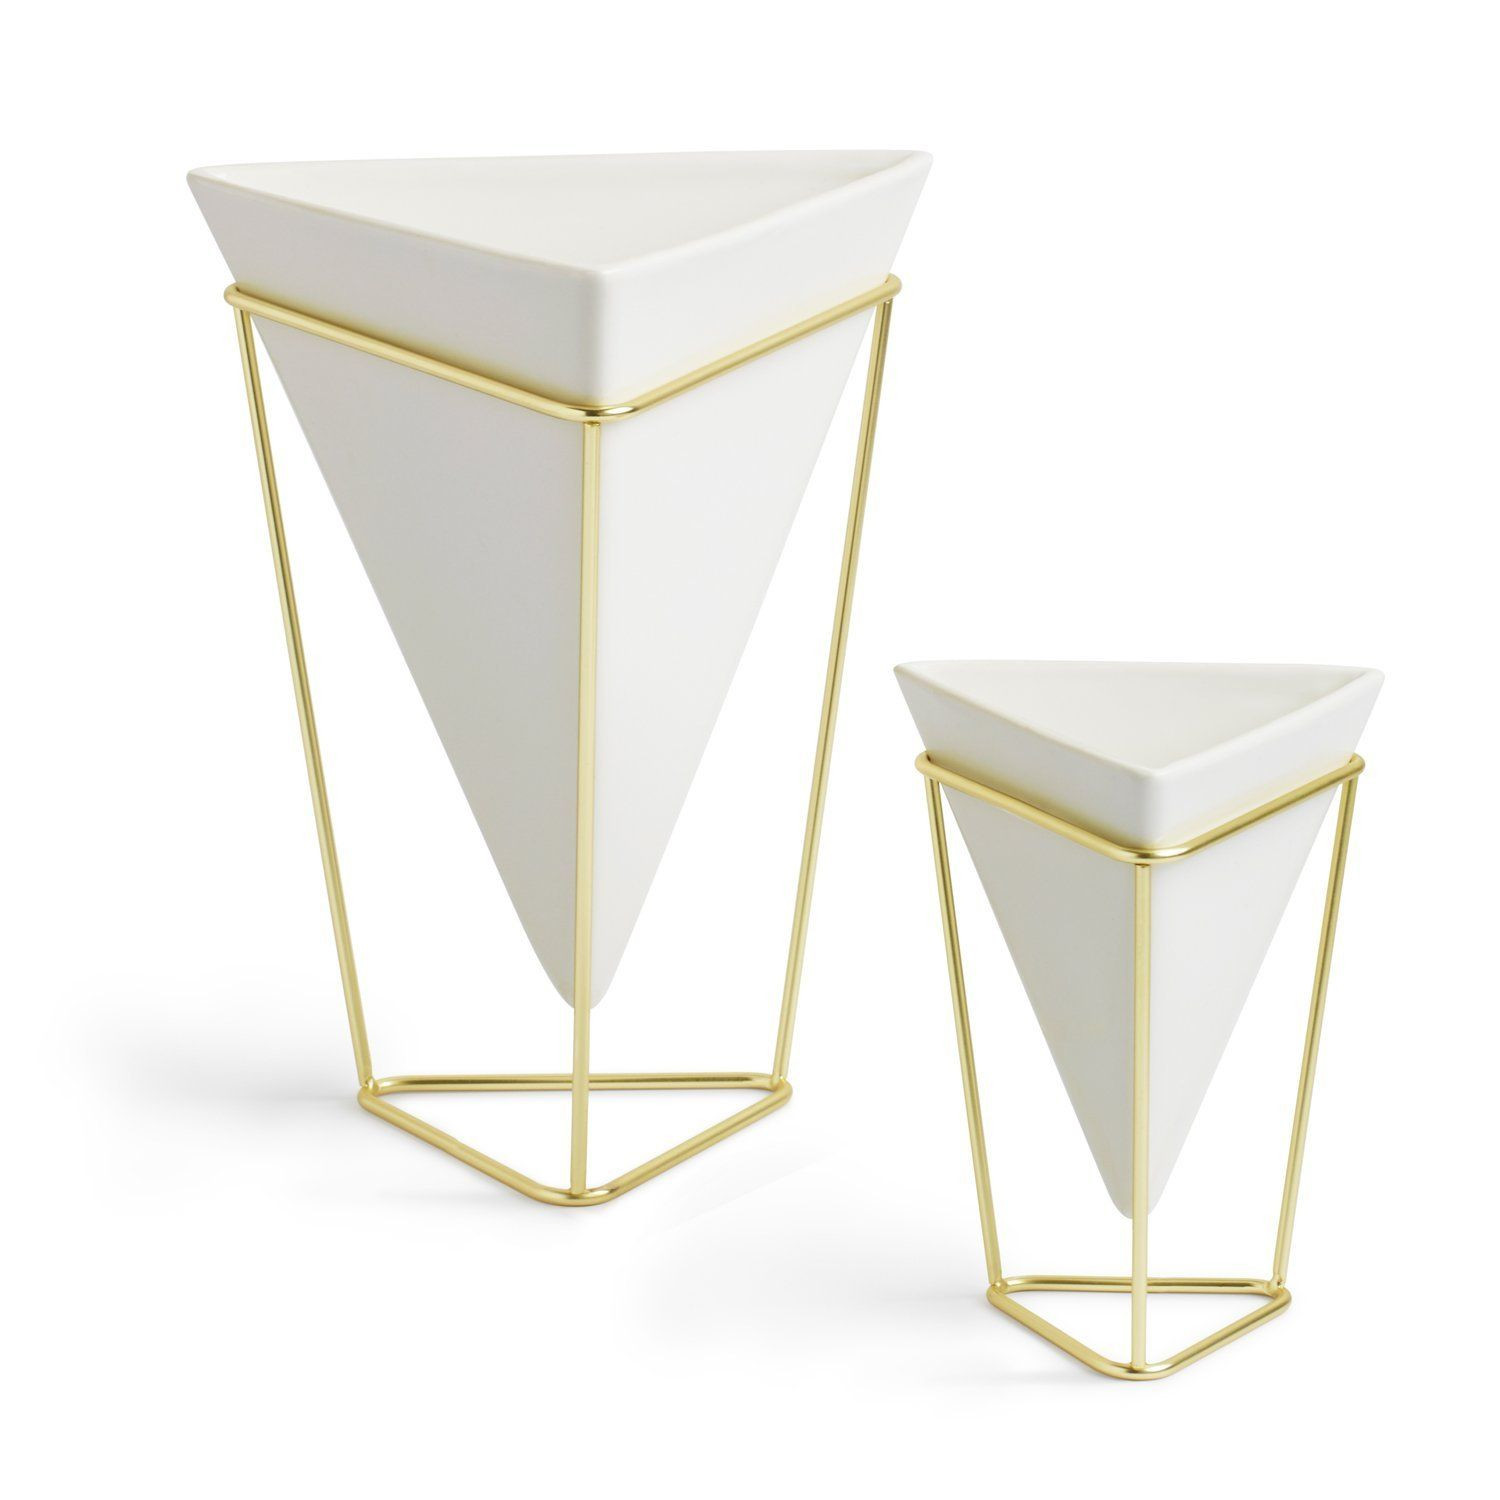 10 Lovable Amazon Clear Glass Vases 2024 free download amazon clear glass vases of umbra small trigg wall set of 2 white brass amazon co uk kitchen regarding umbra small trigg wall set of 2 white brass amazon co